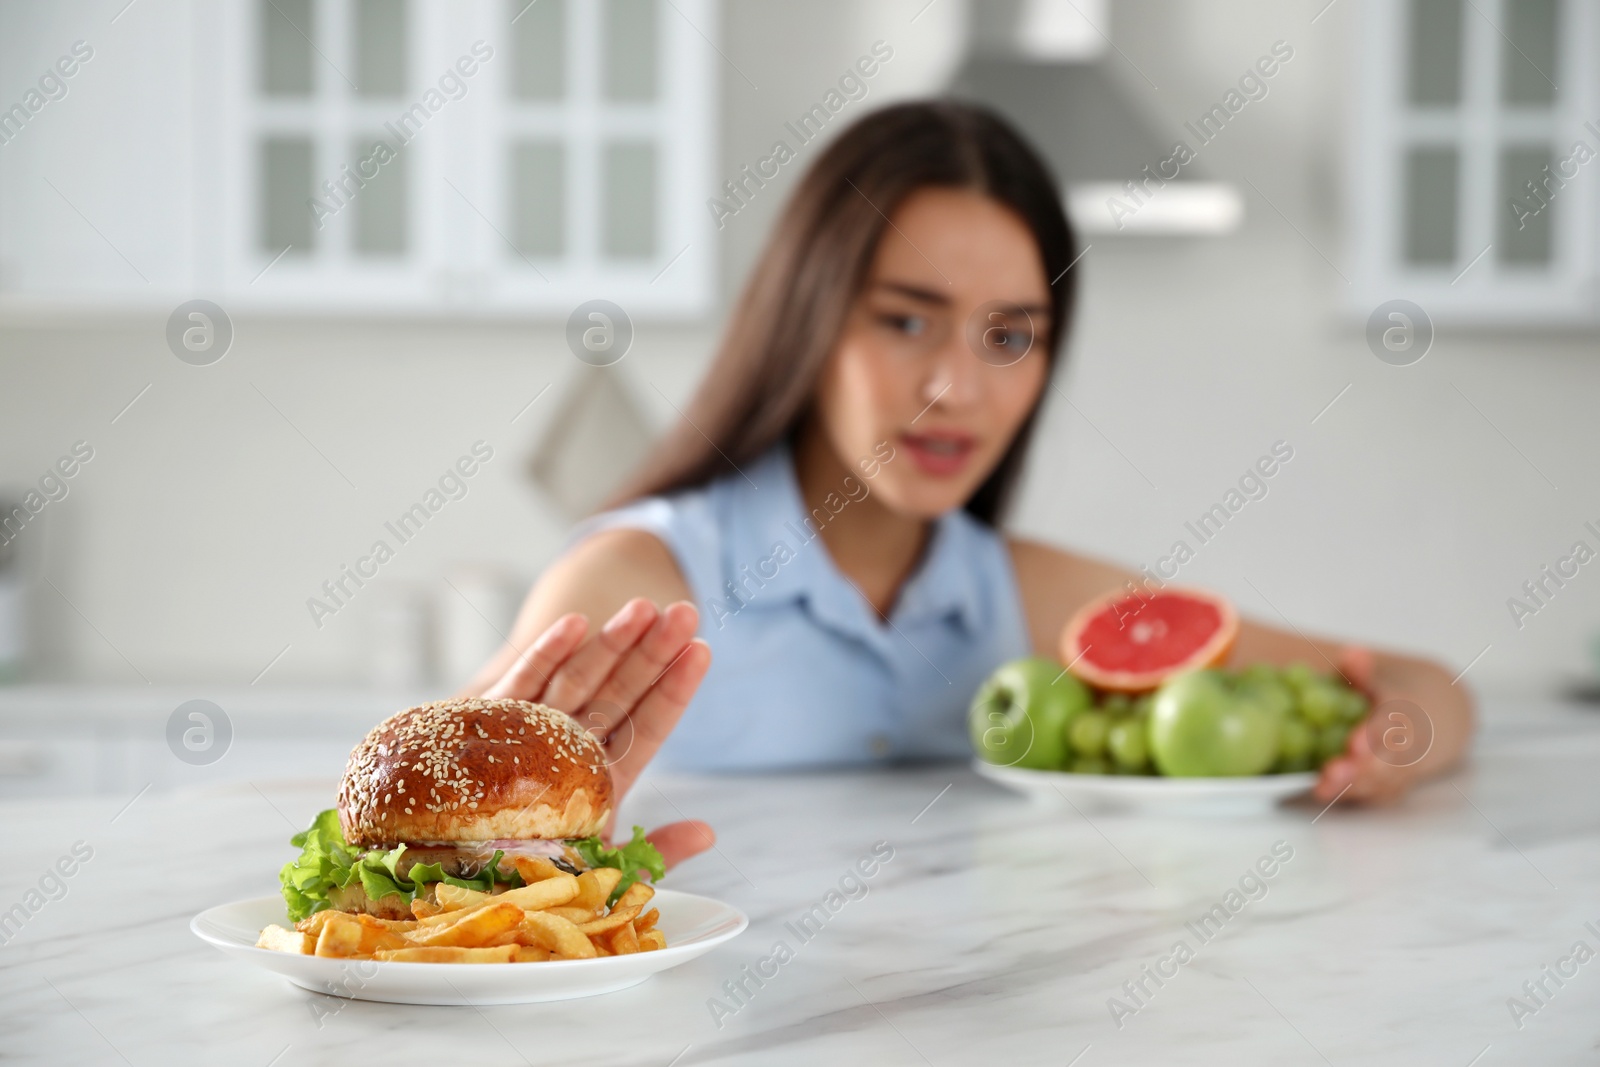 Photo of Woman choosing between fruits and burger with French fries in kitchen, focus on food